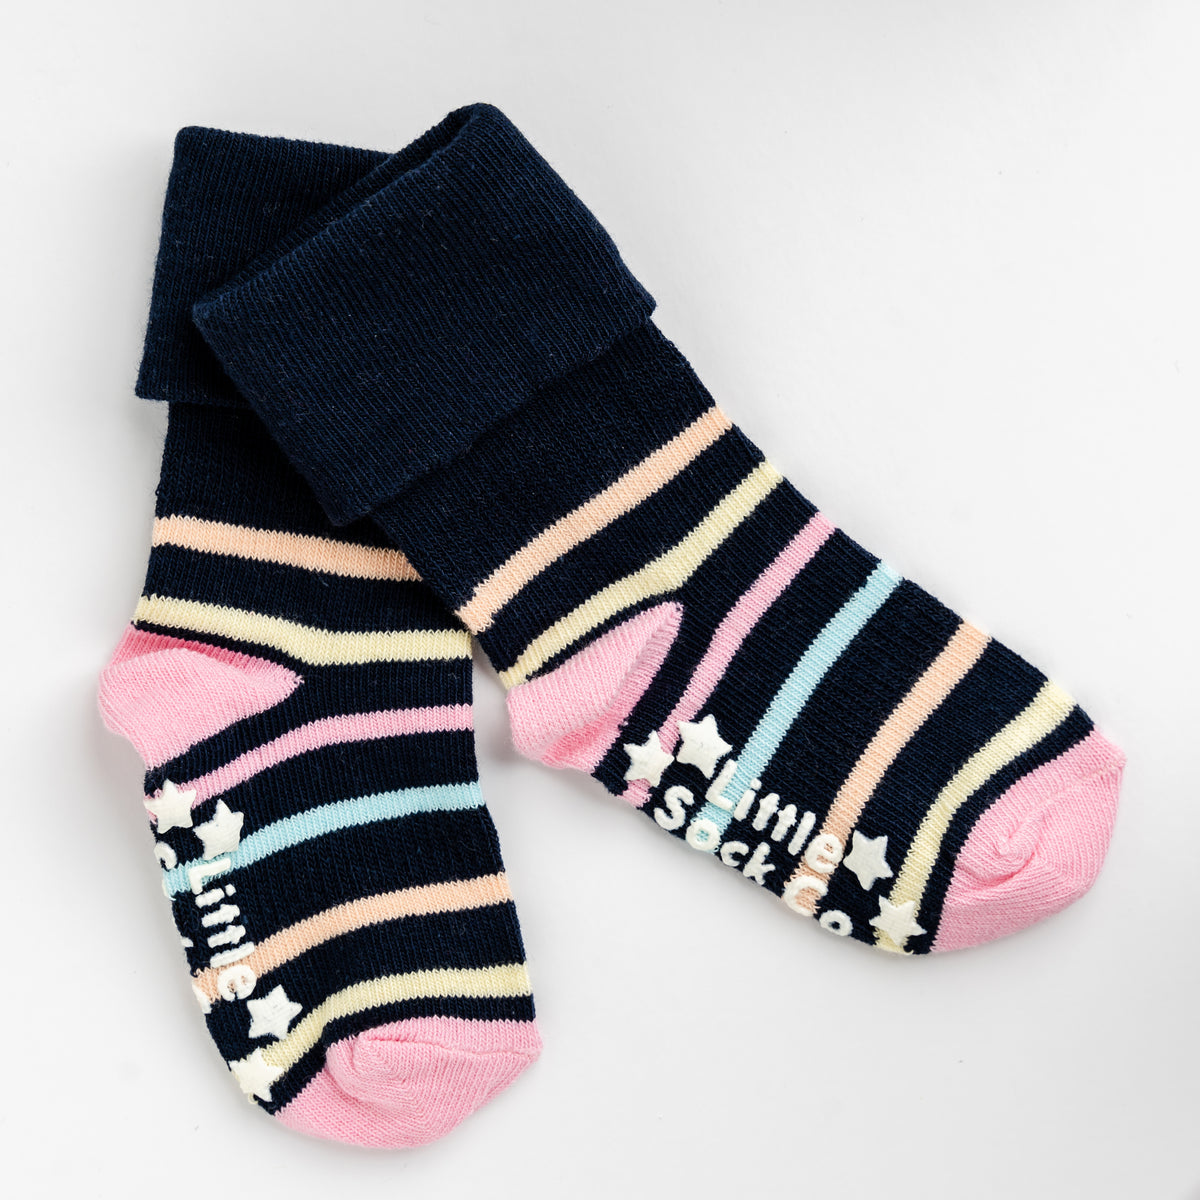 OUTLET Non-Slip Stay on Baby and Toddler Socks - Navy pink multi-stripe - 3 Pack 6-12 months - Outlet